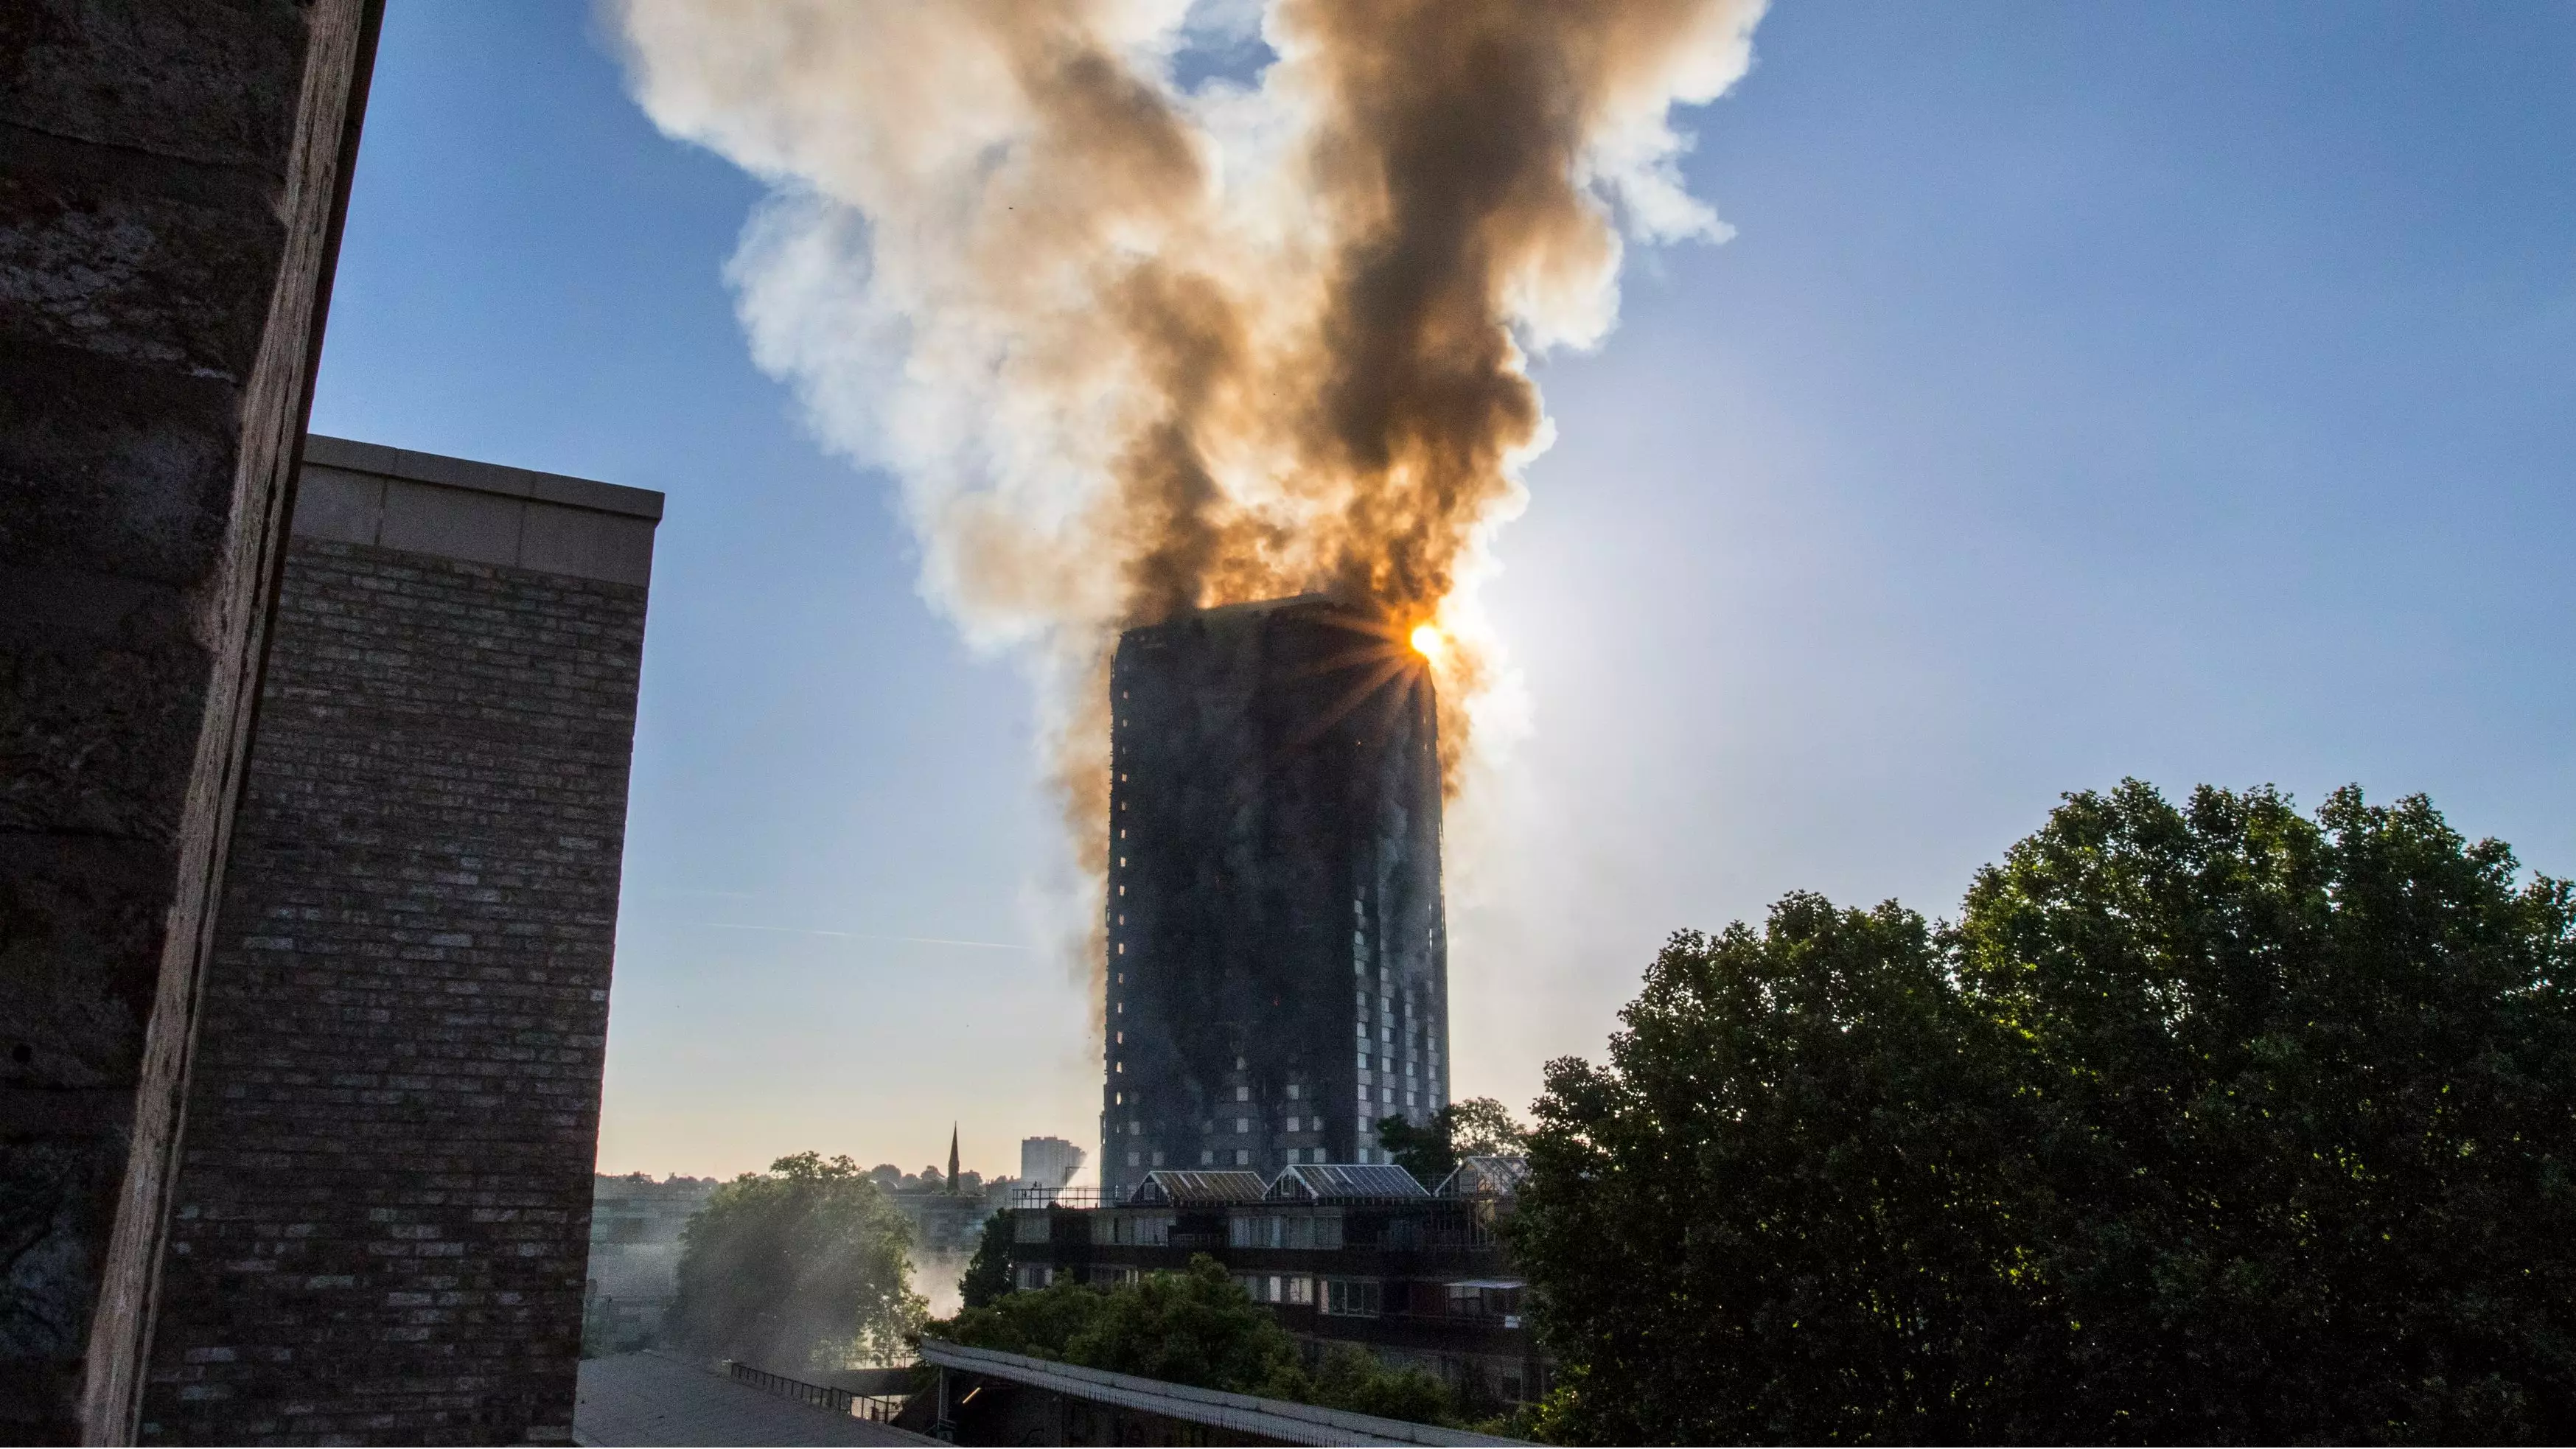 Grenfell Tower in London on fire